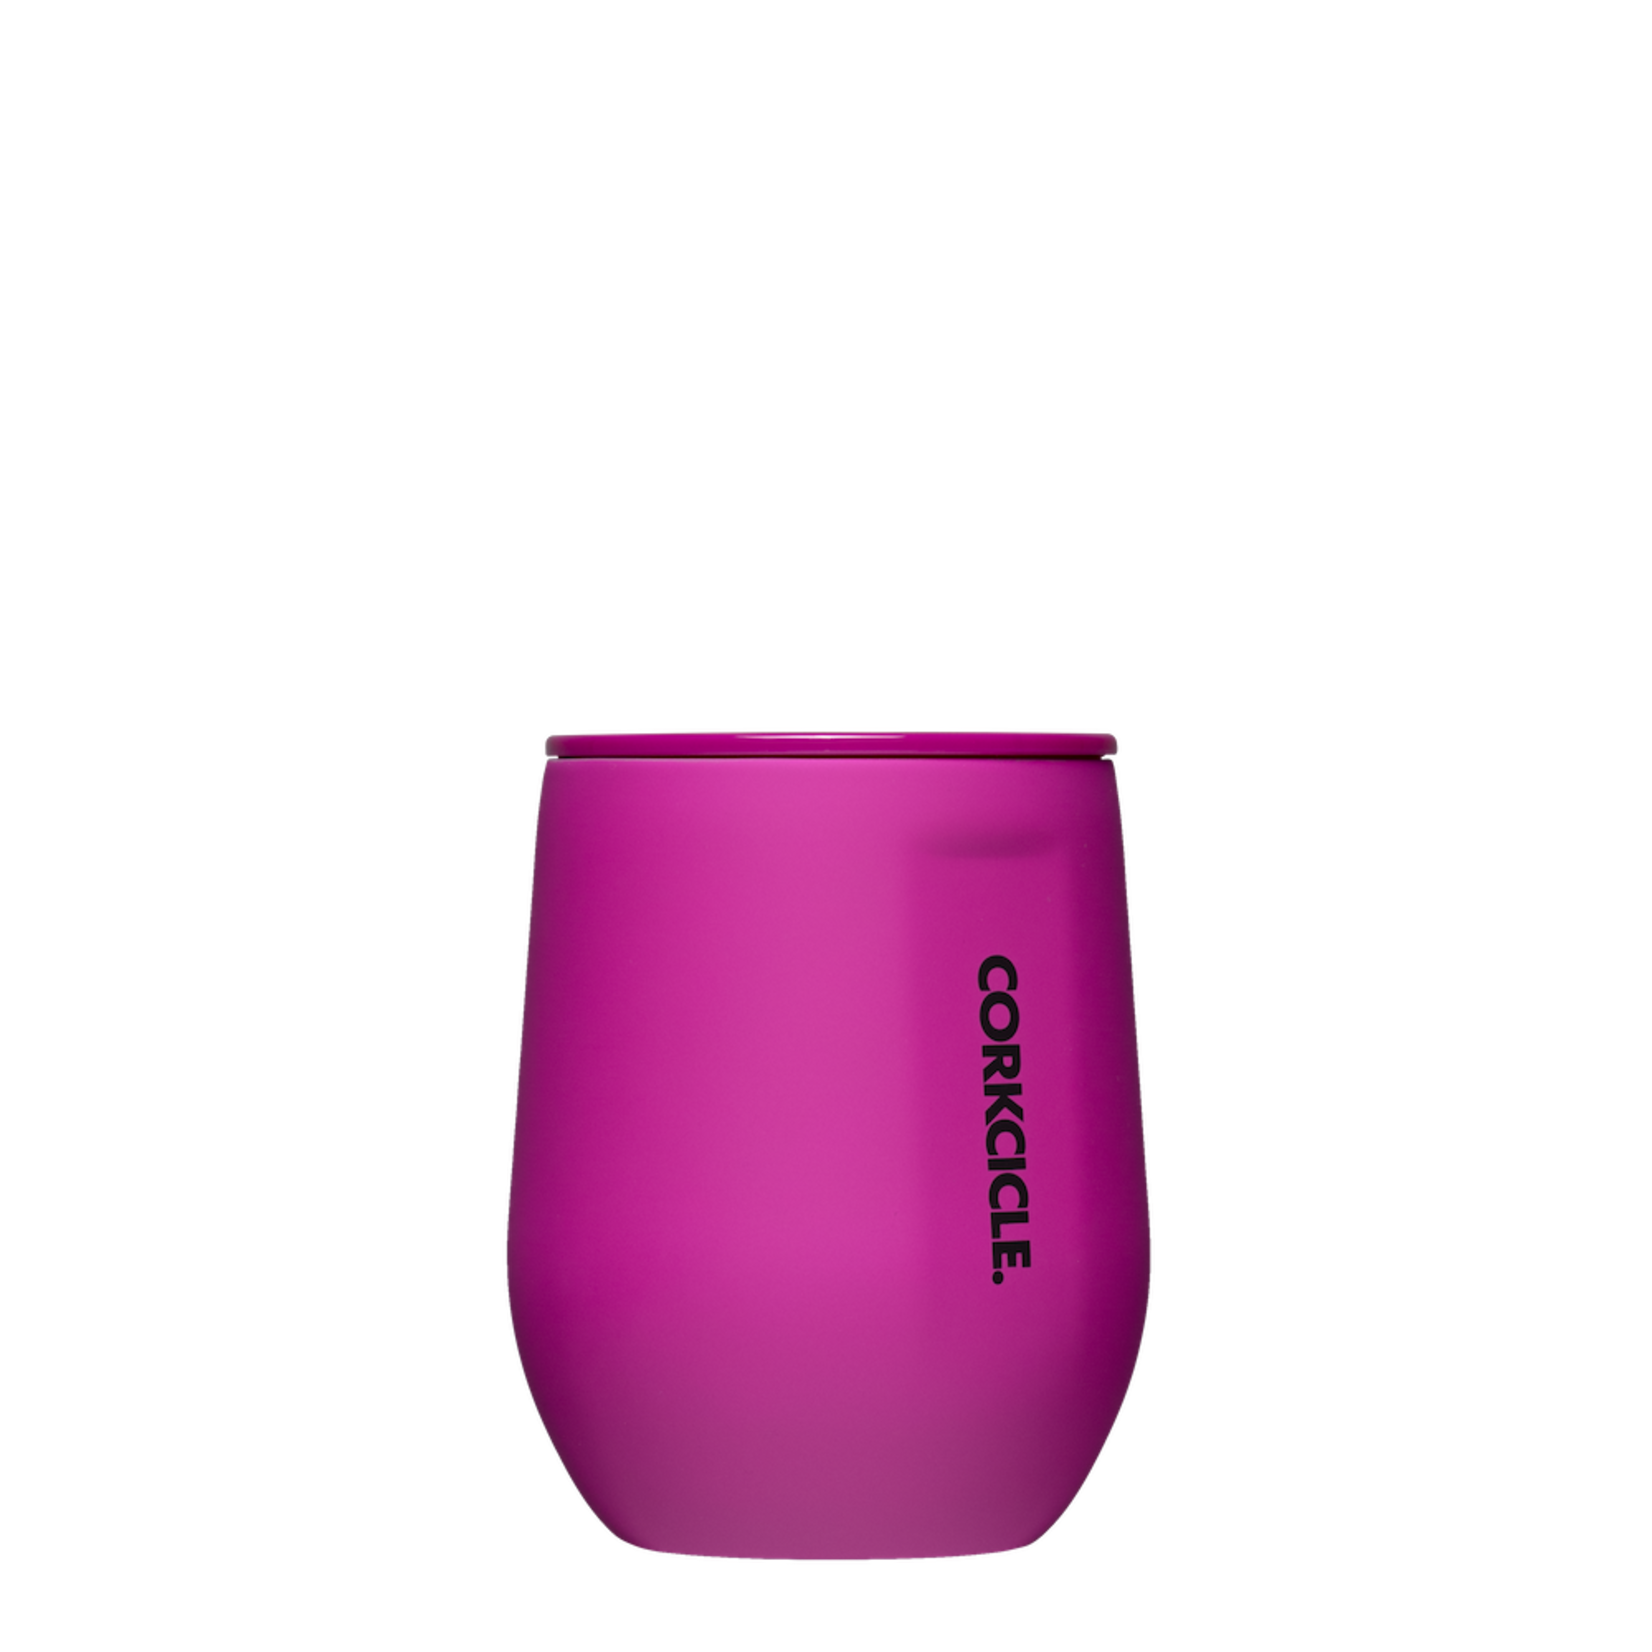 Corkcicle Corkcicle - 12 oz Stemless - Berry Punch